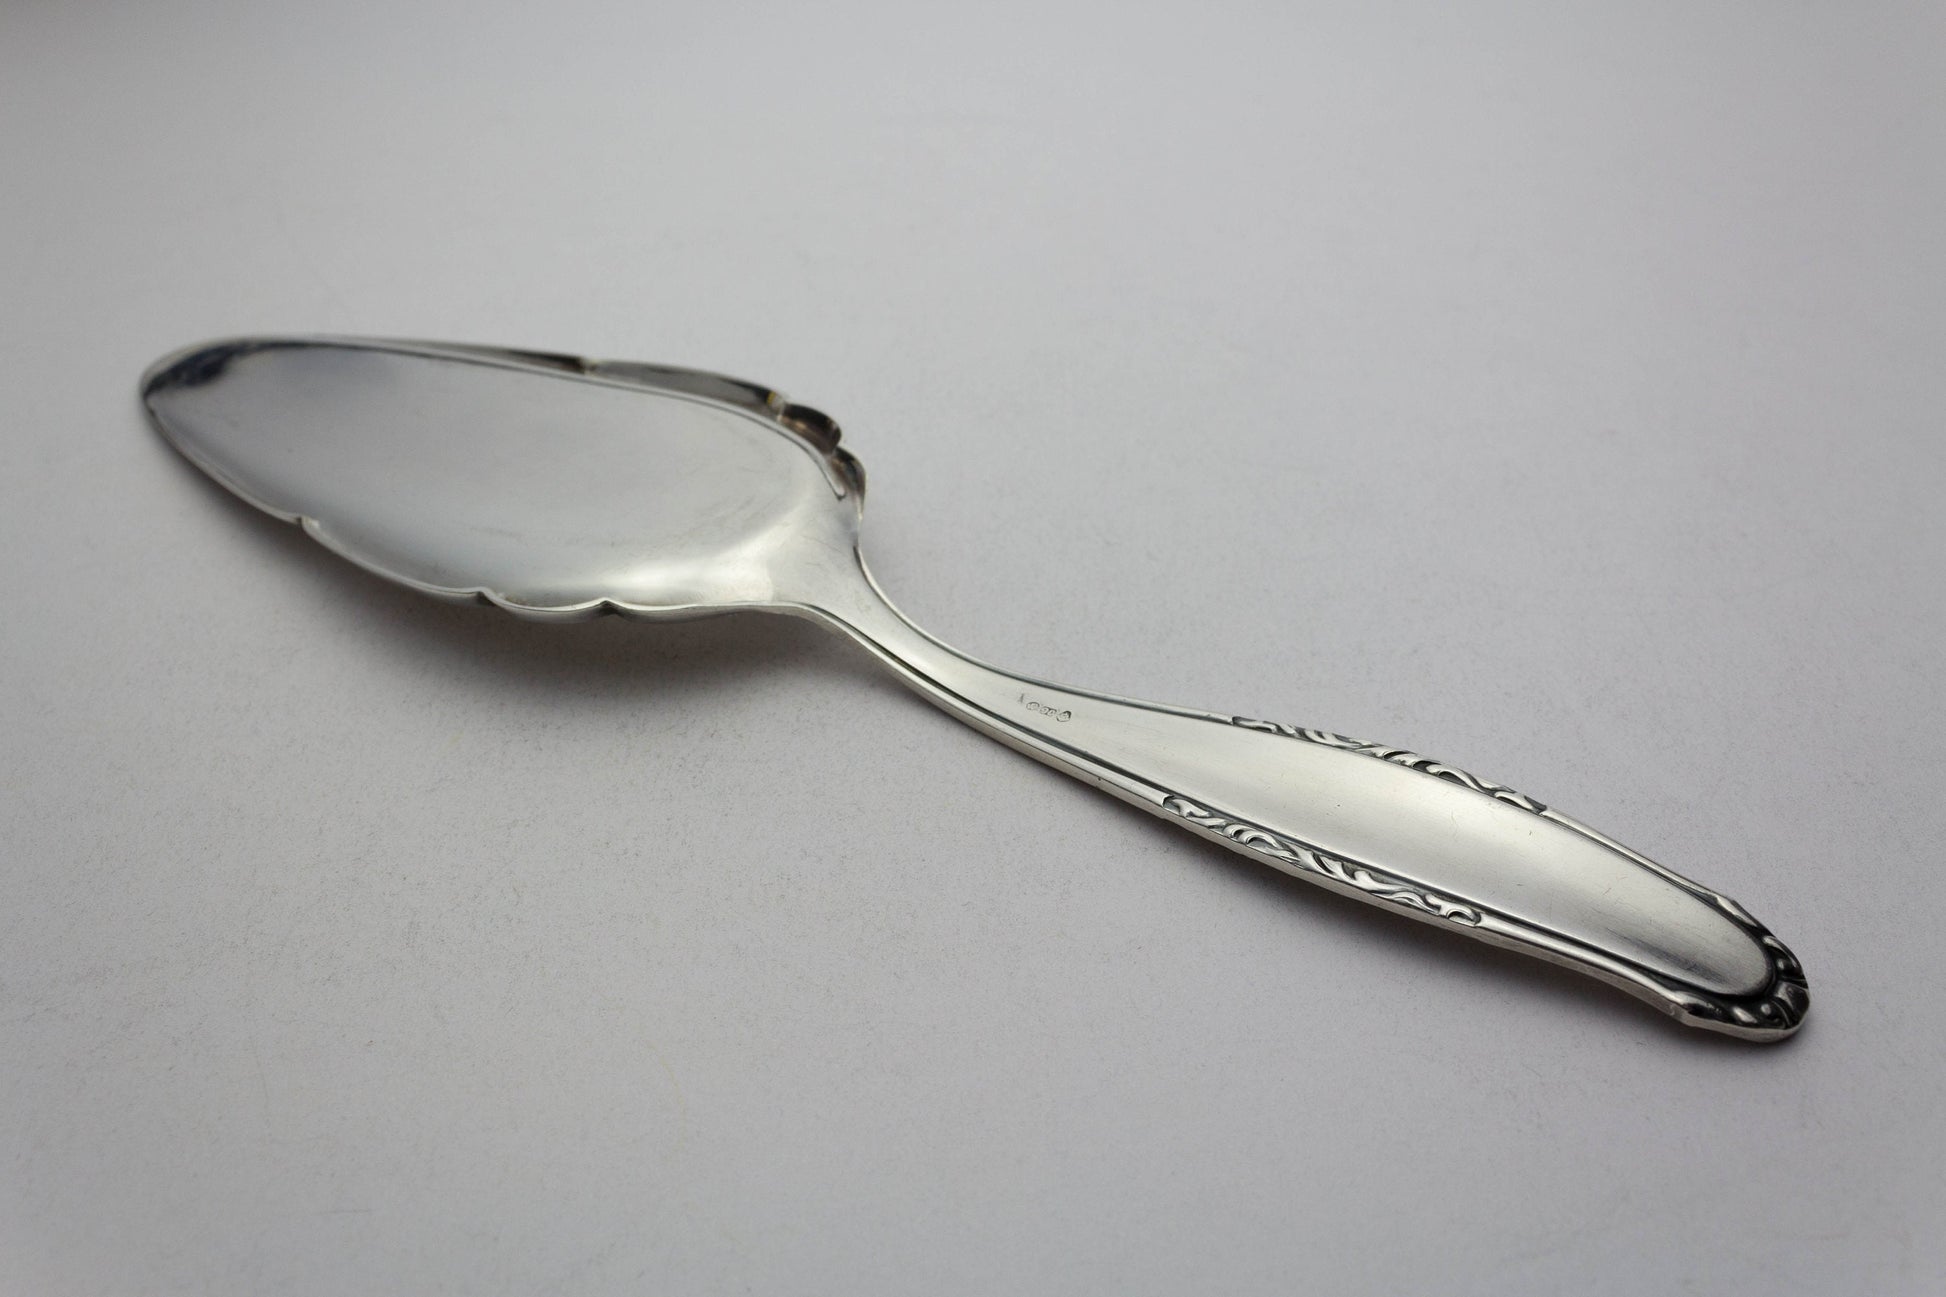 Small cake lifter, silver plated, pastry lift, vintage, cutlery 